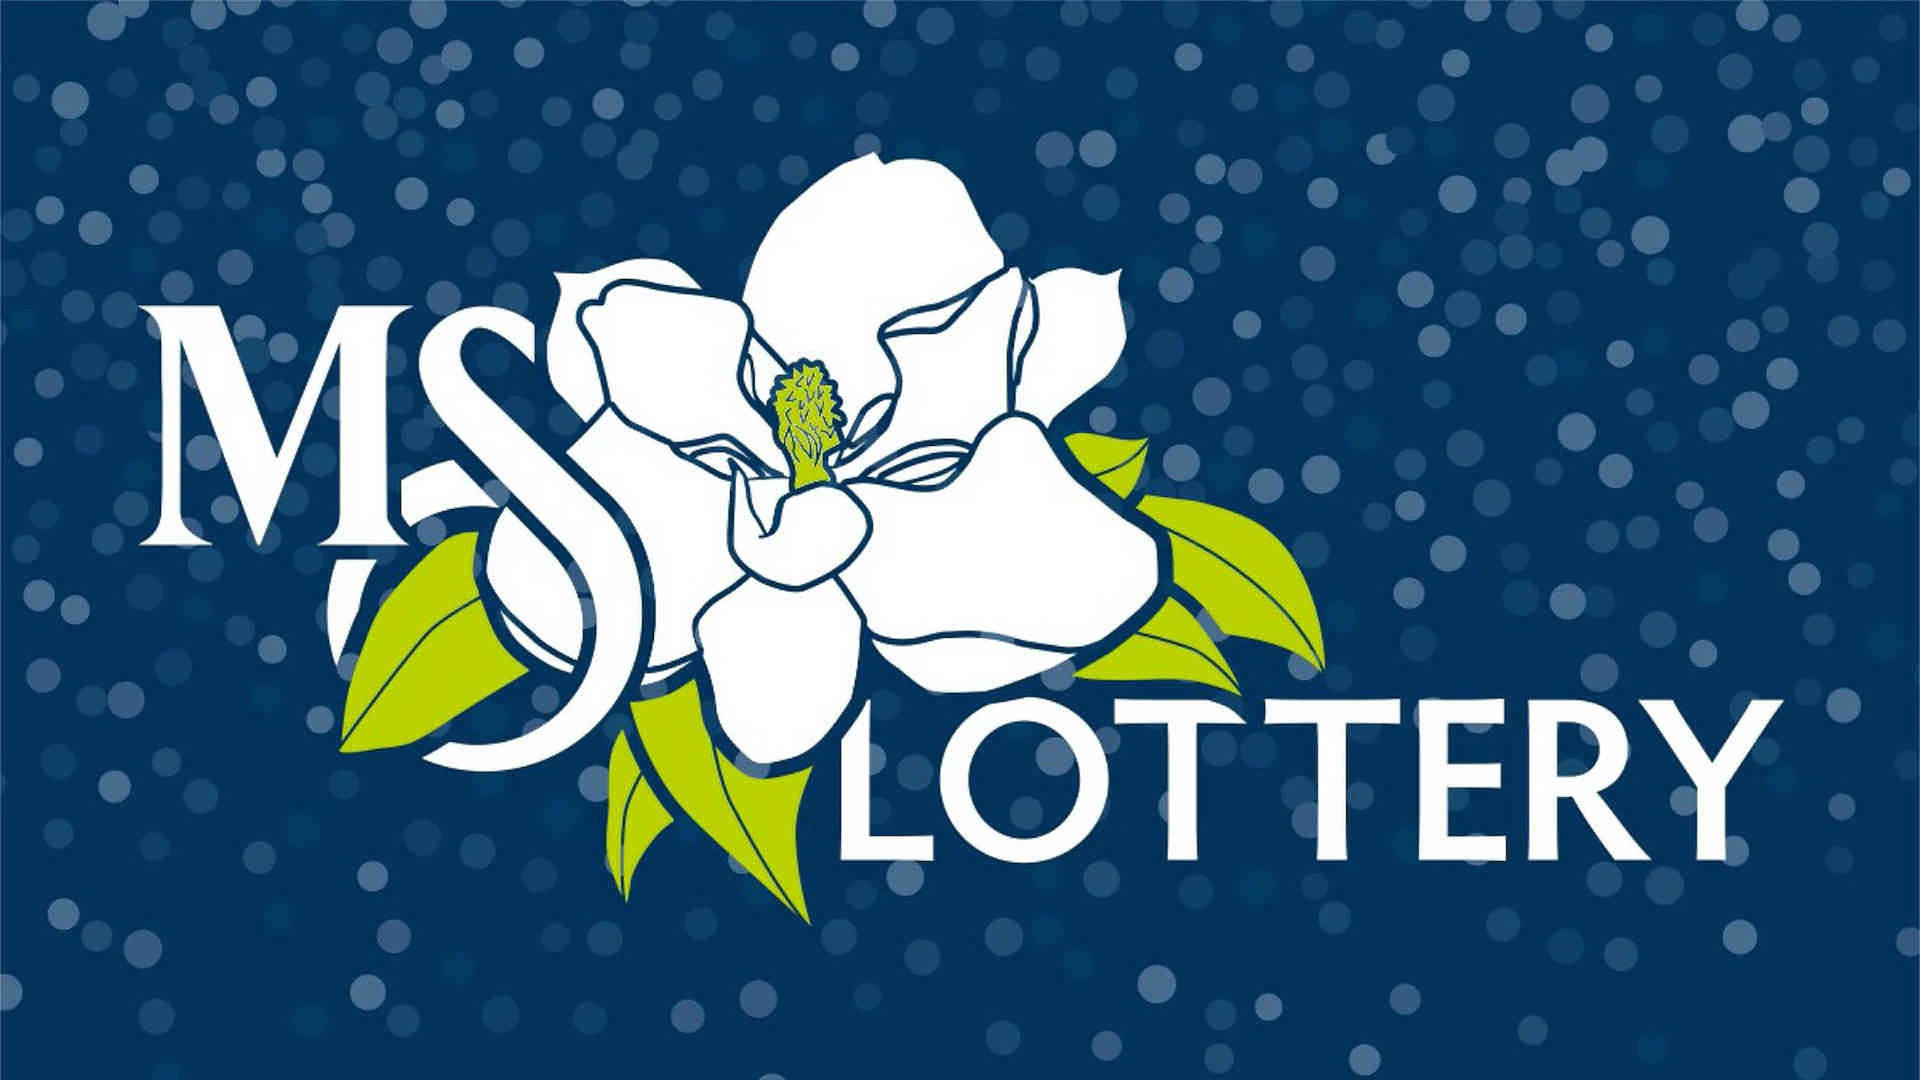 Ms Lottery With White Flower Wallpaper